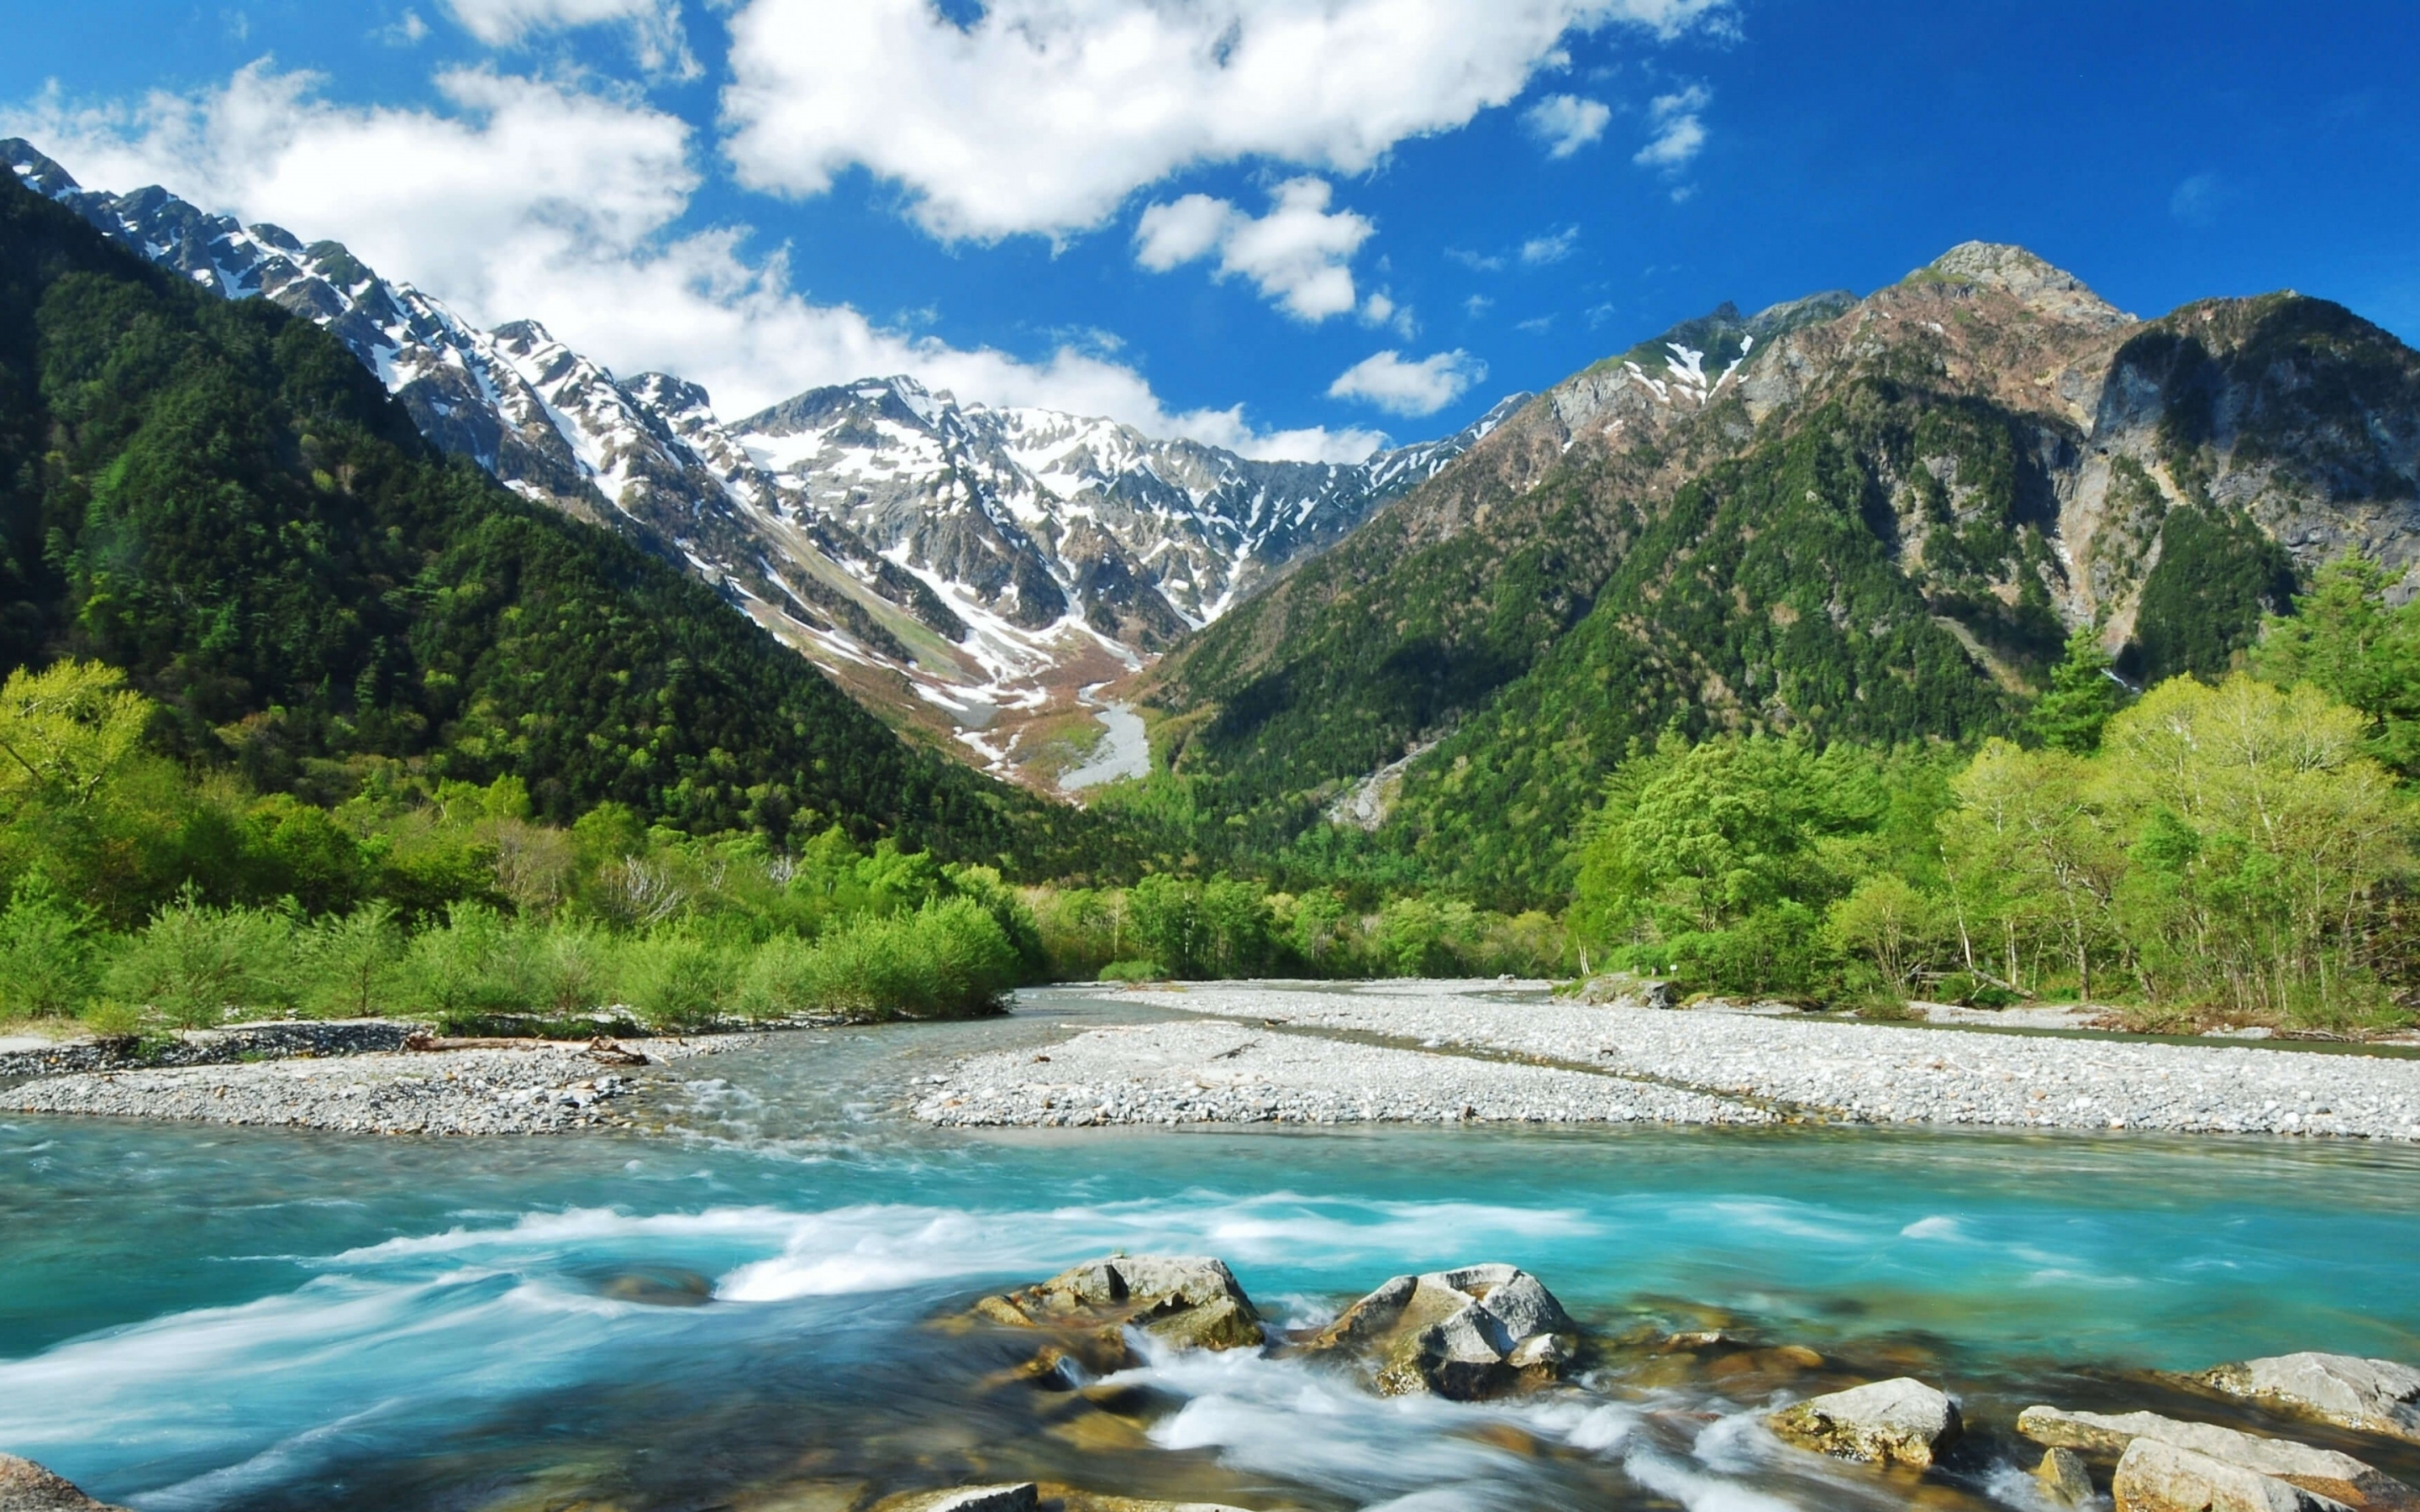 Kamikochi mountains, japan, River, outdoor, blue sky, sunny day, 2880x1800 wallpaper